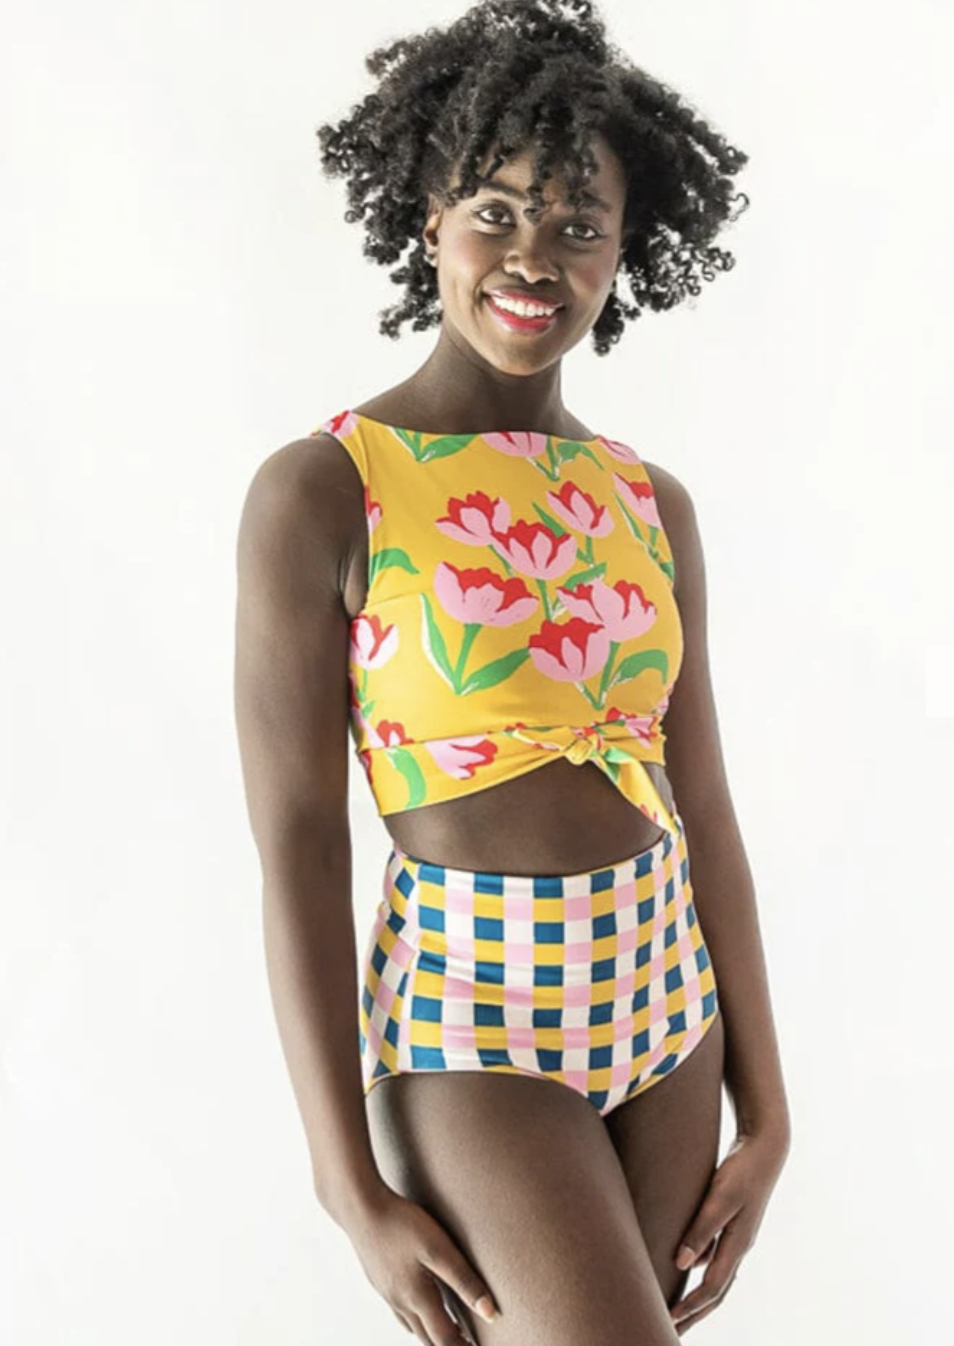 A model in a two piece swim suit with floral long line high necked tie-front top and plaid high waisted bottoms.